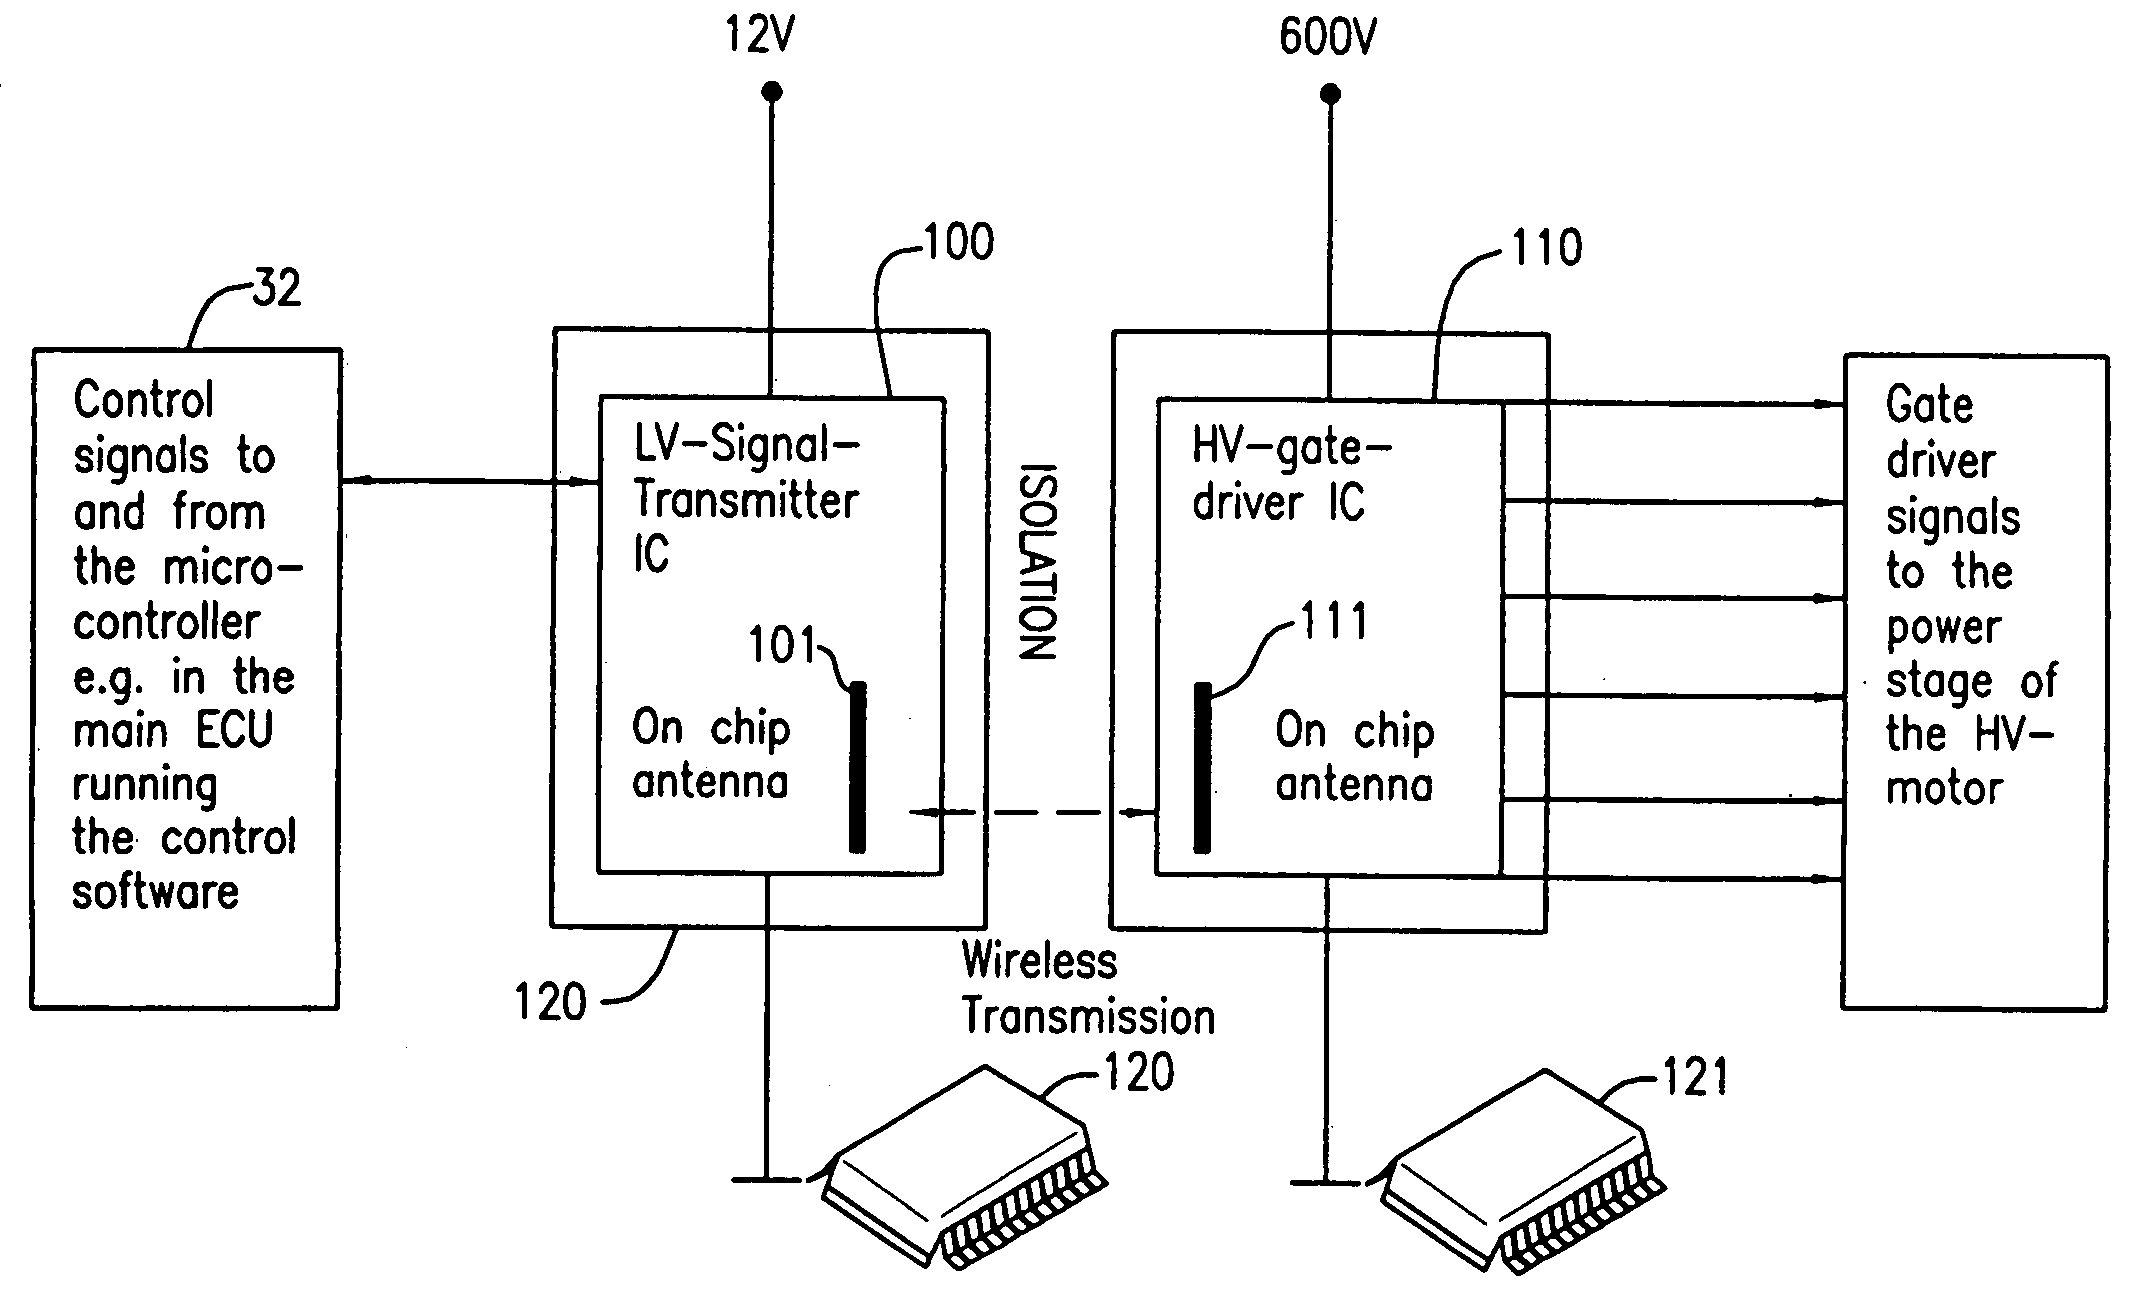 Gate-driver IC with HV-isolation, especially hybrid electric vehicle motor drive concept